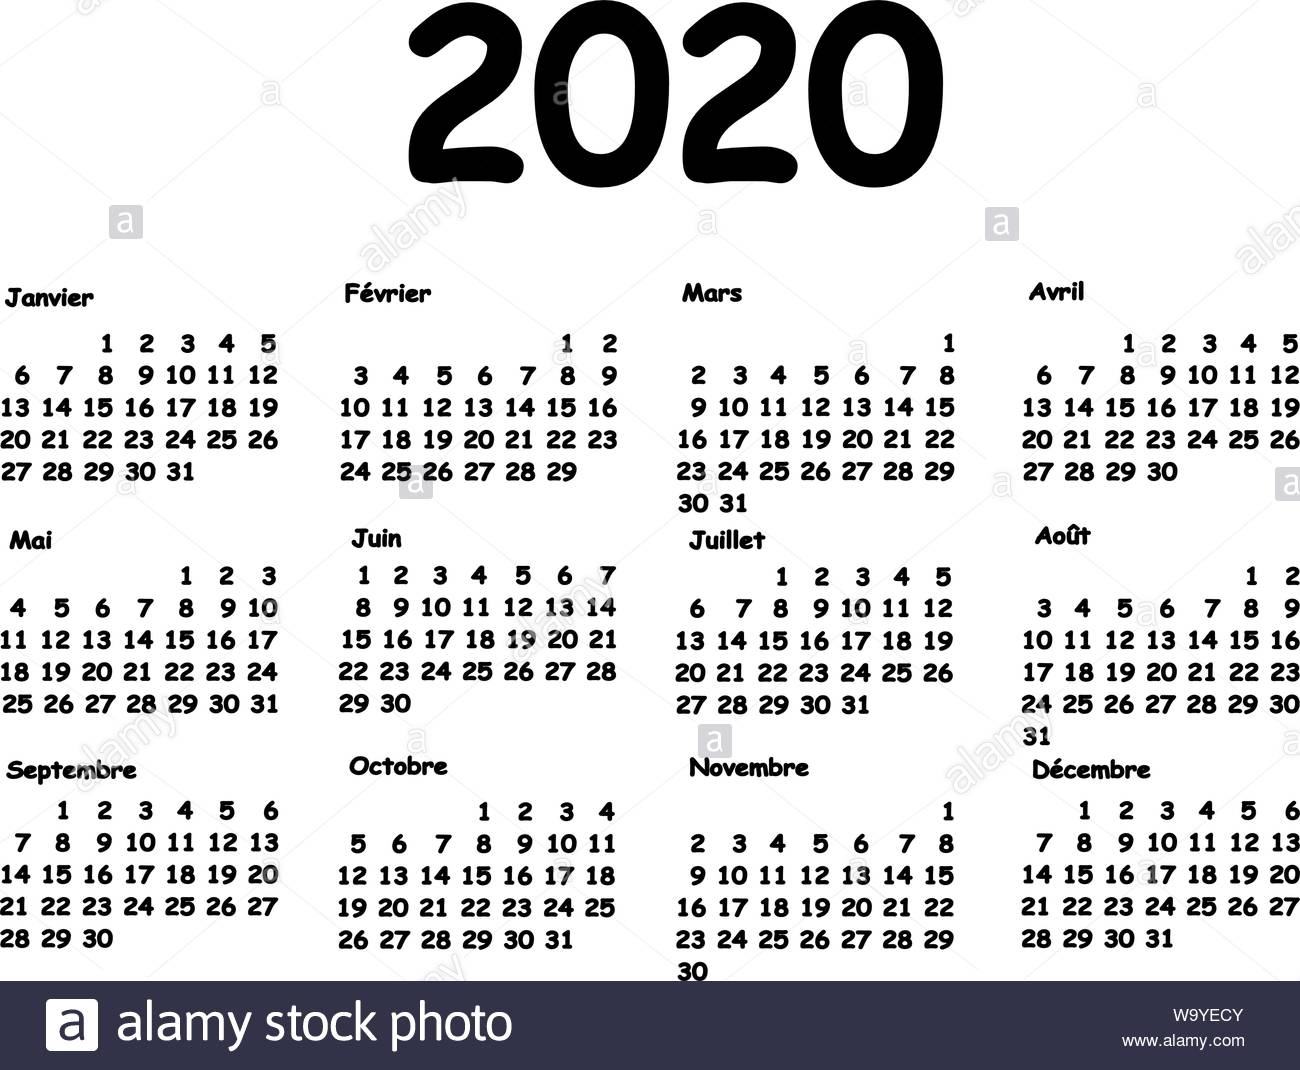 Calendar 2020 Grid French Language. Monthly Planning For